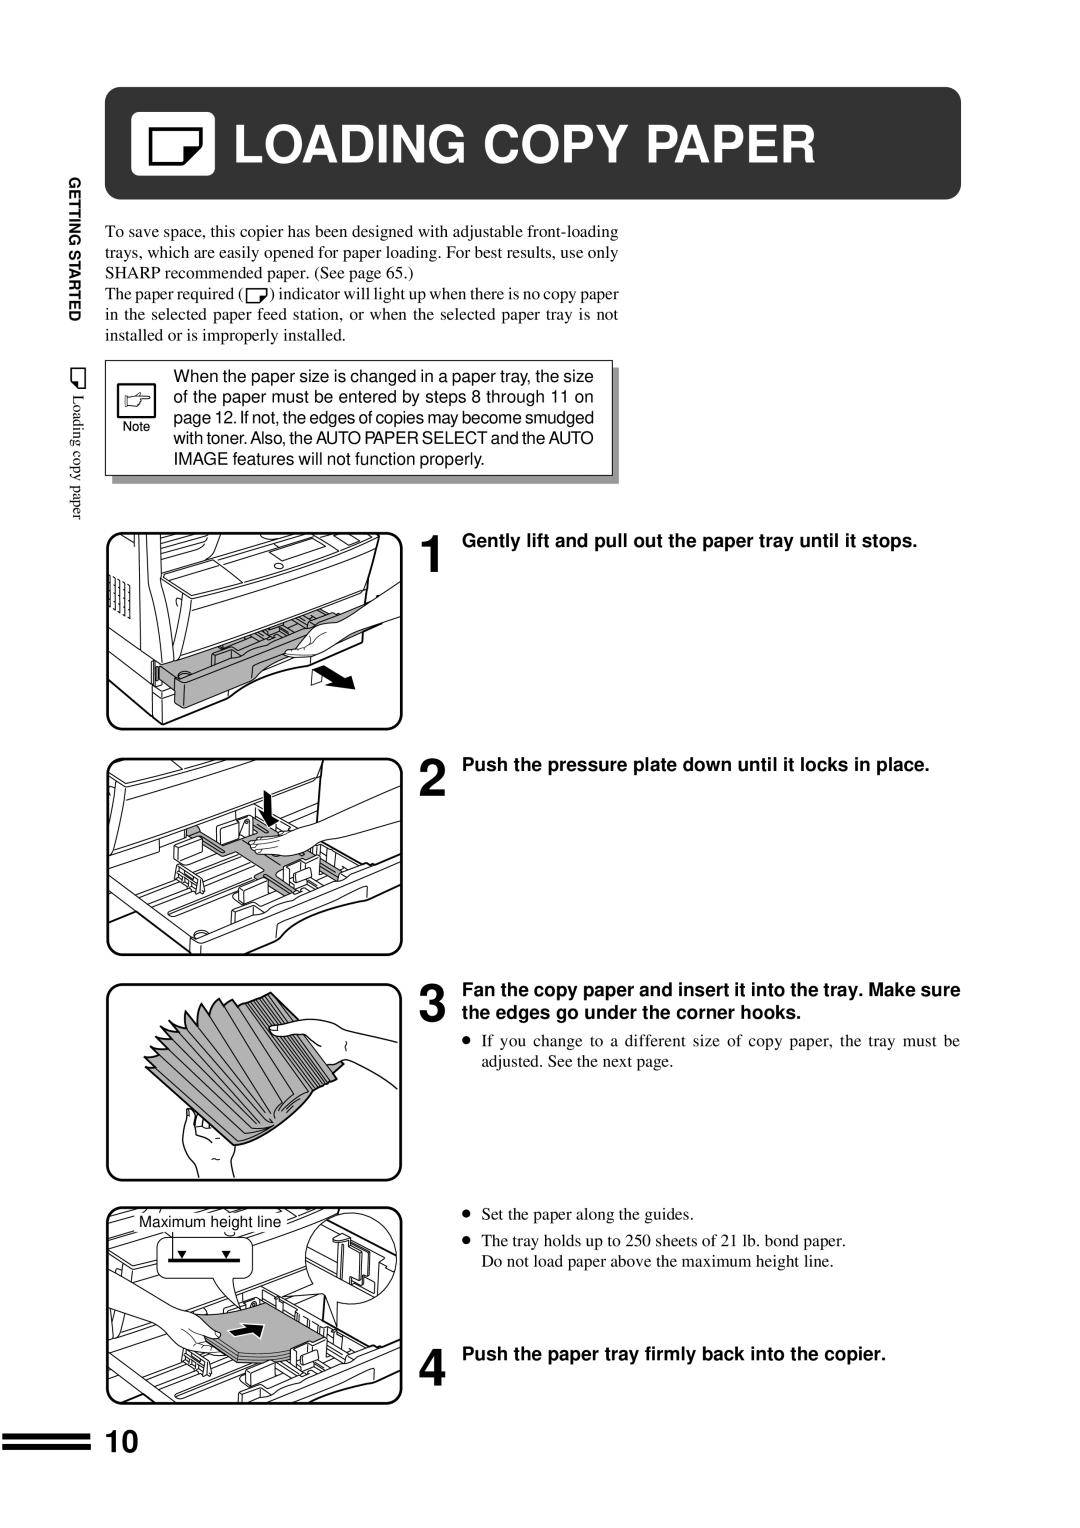 Sharp AR-207 operation manual Loading Copy Paper, Gently lift and pull out the paper tray until it stops 